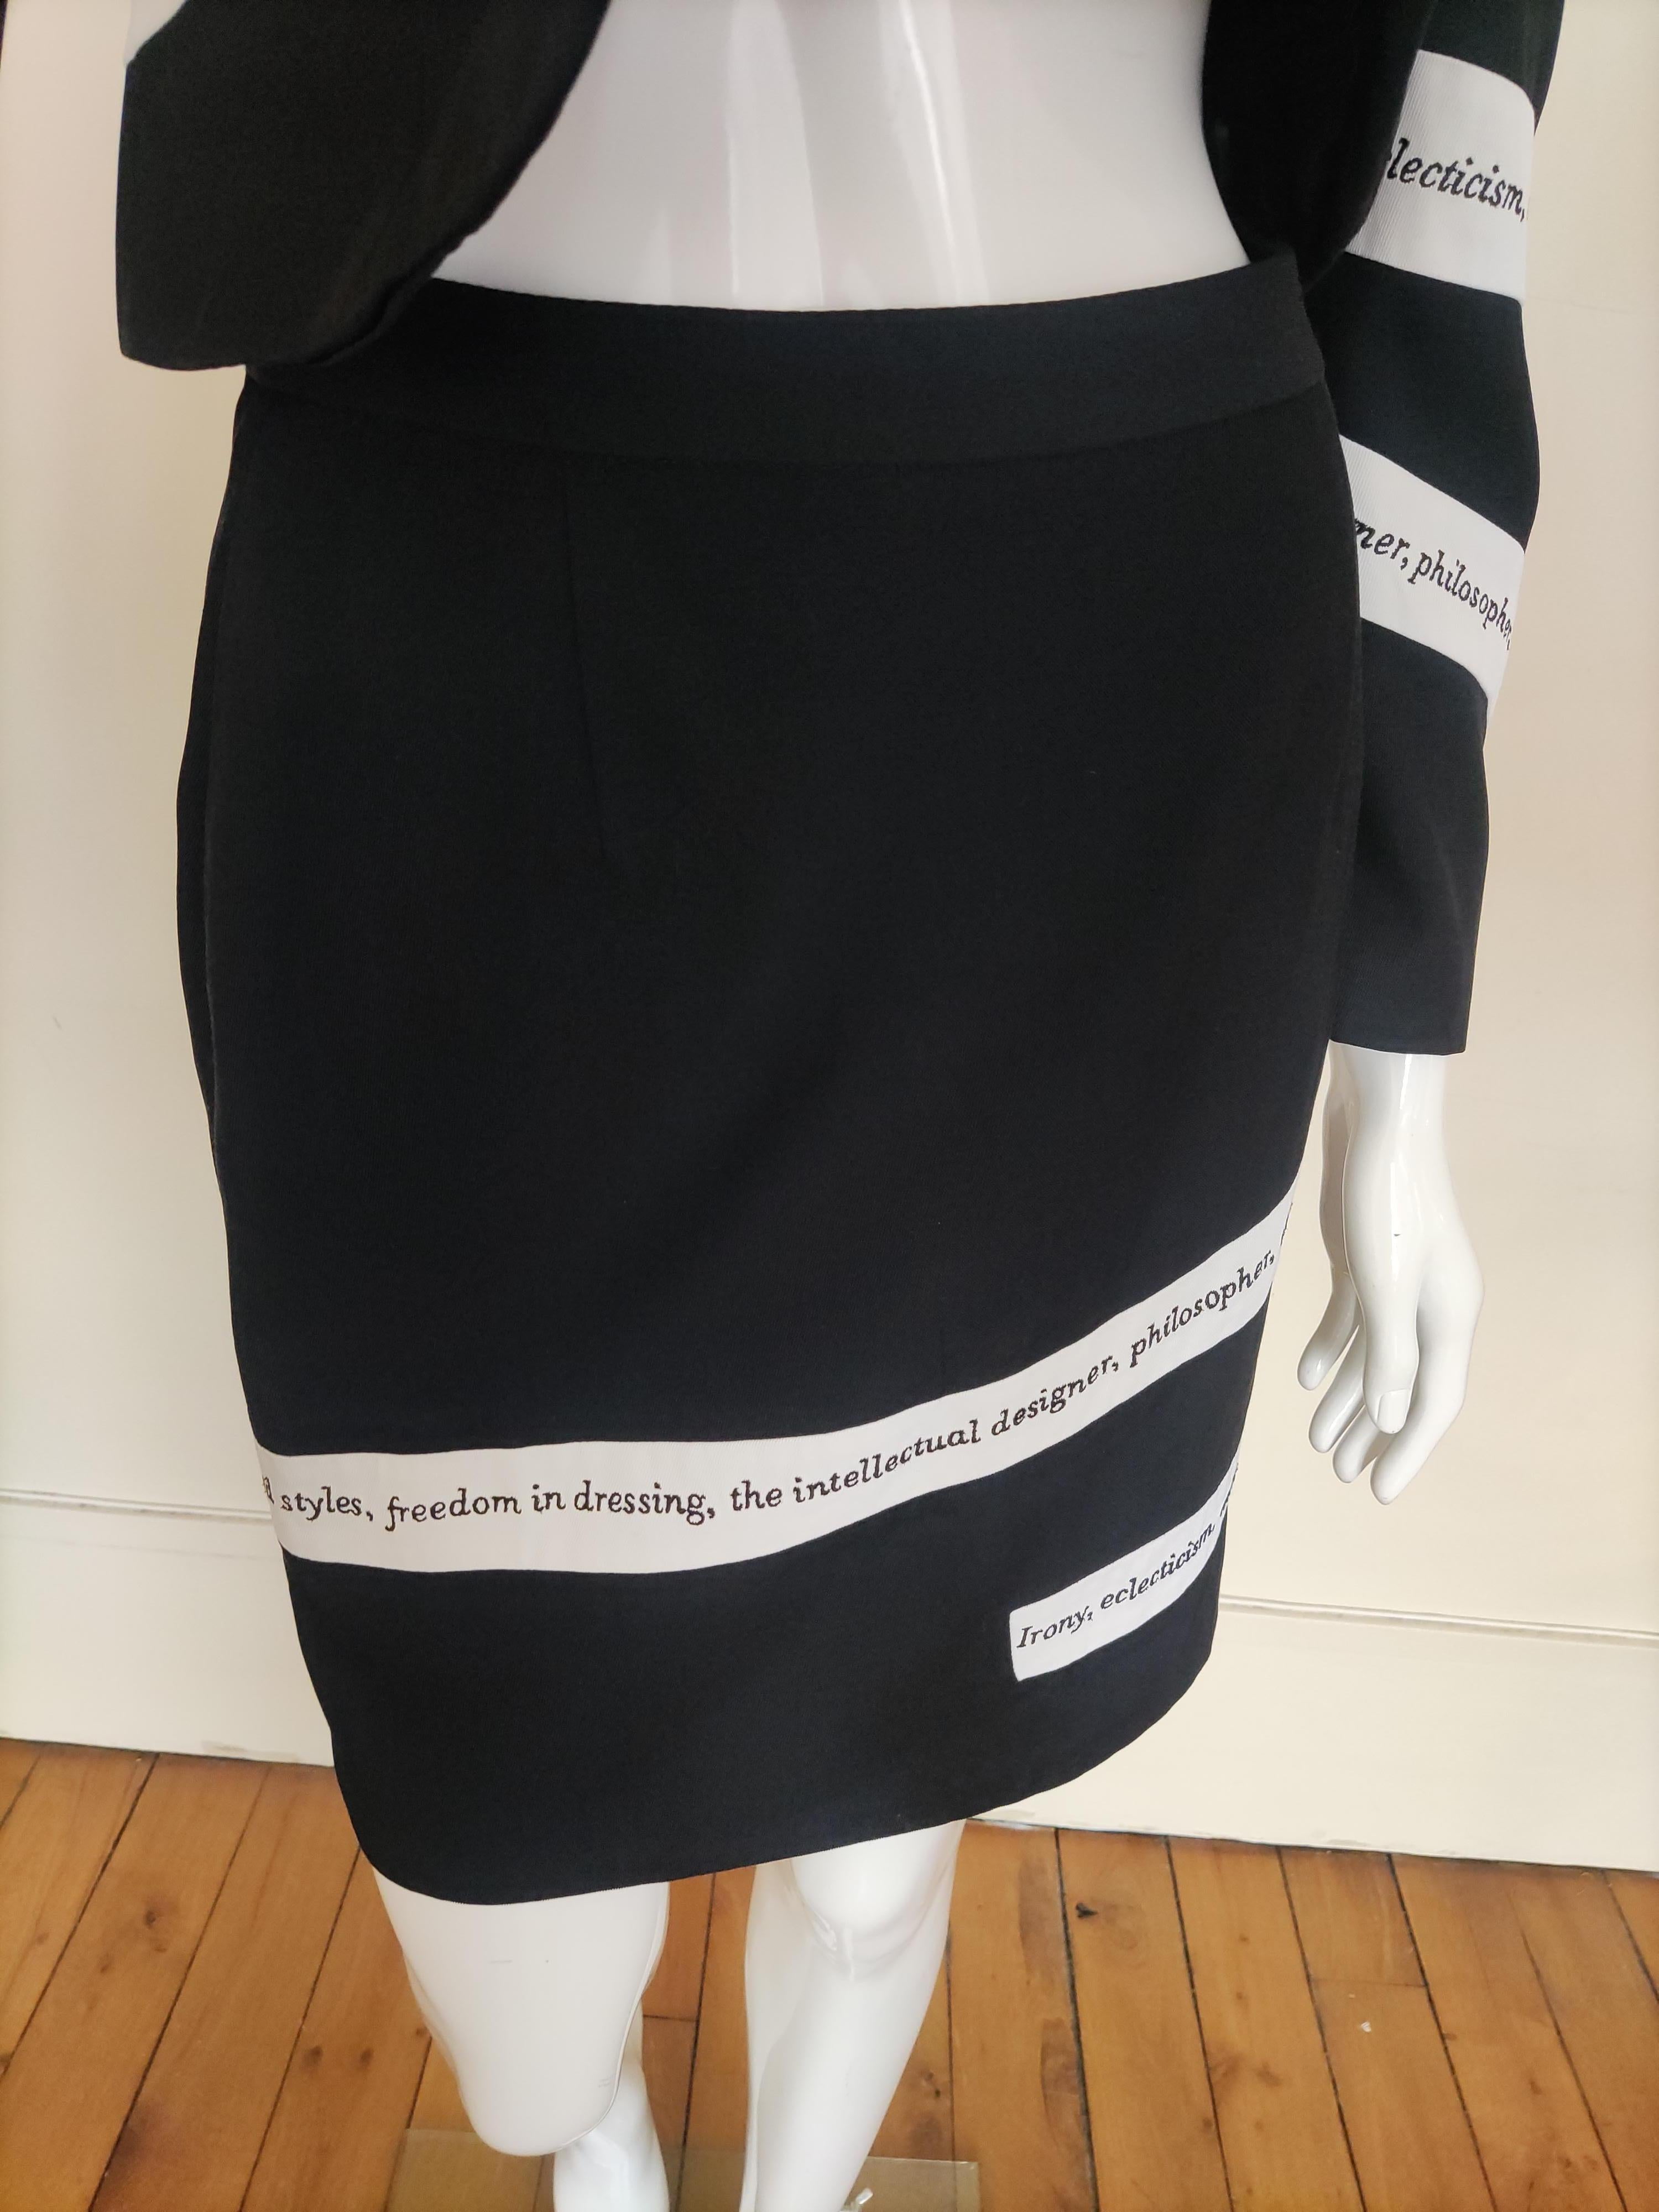 Moschino Cheap and Chic Irony Text Tape Vintage Couture Black White Dress Suit For Sale 11